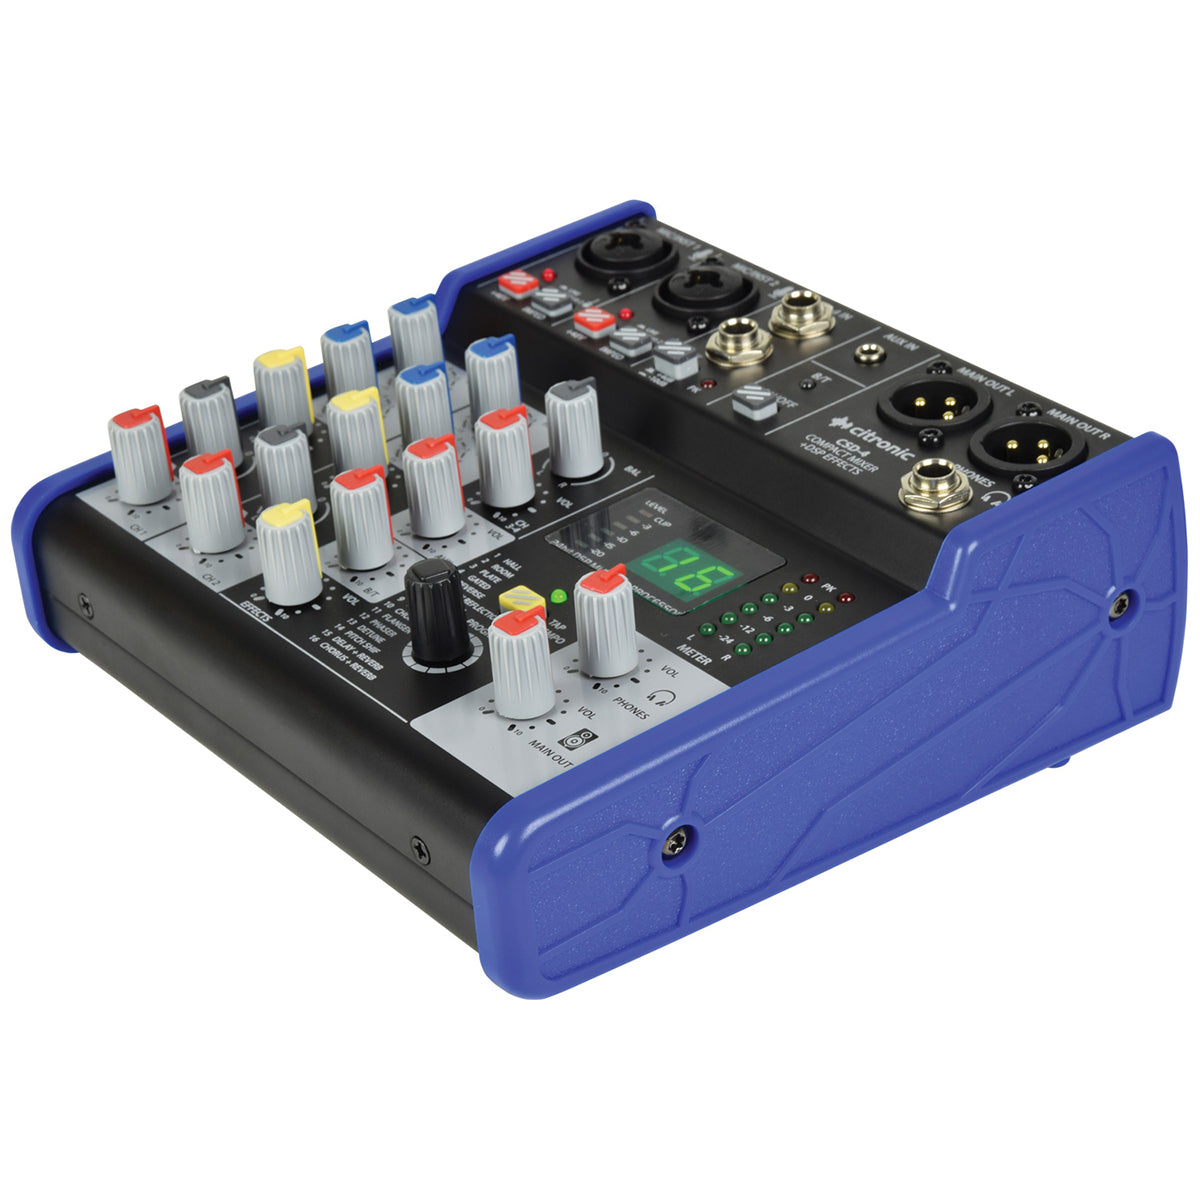 Citronic CSD-4 Compact Mixer with BT receiver + DSP Effects (170875)